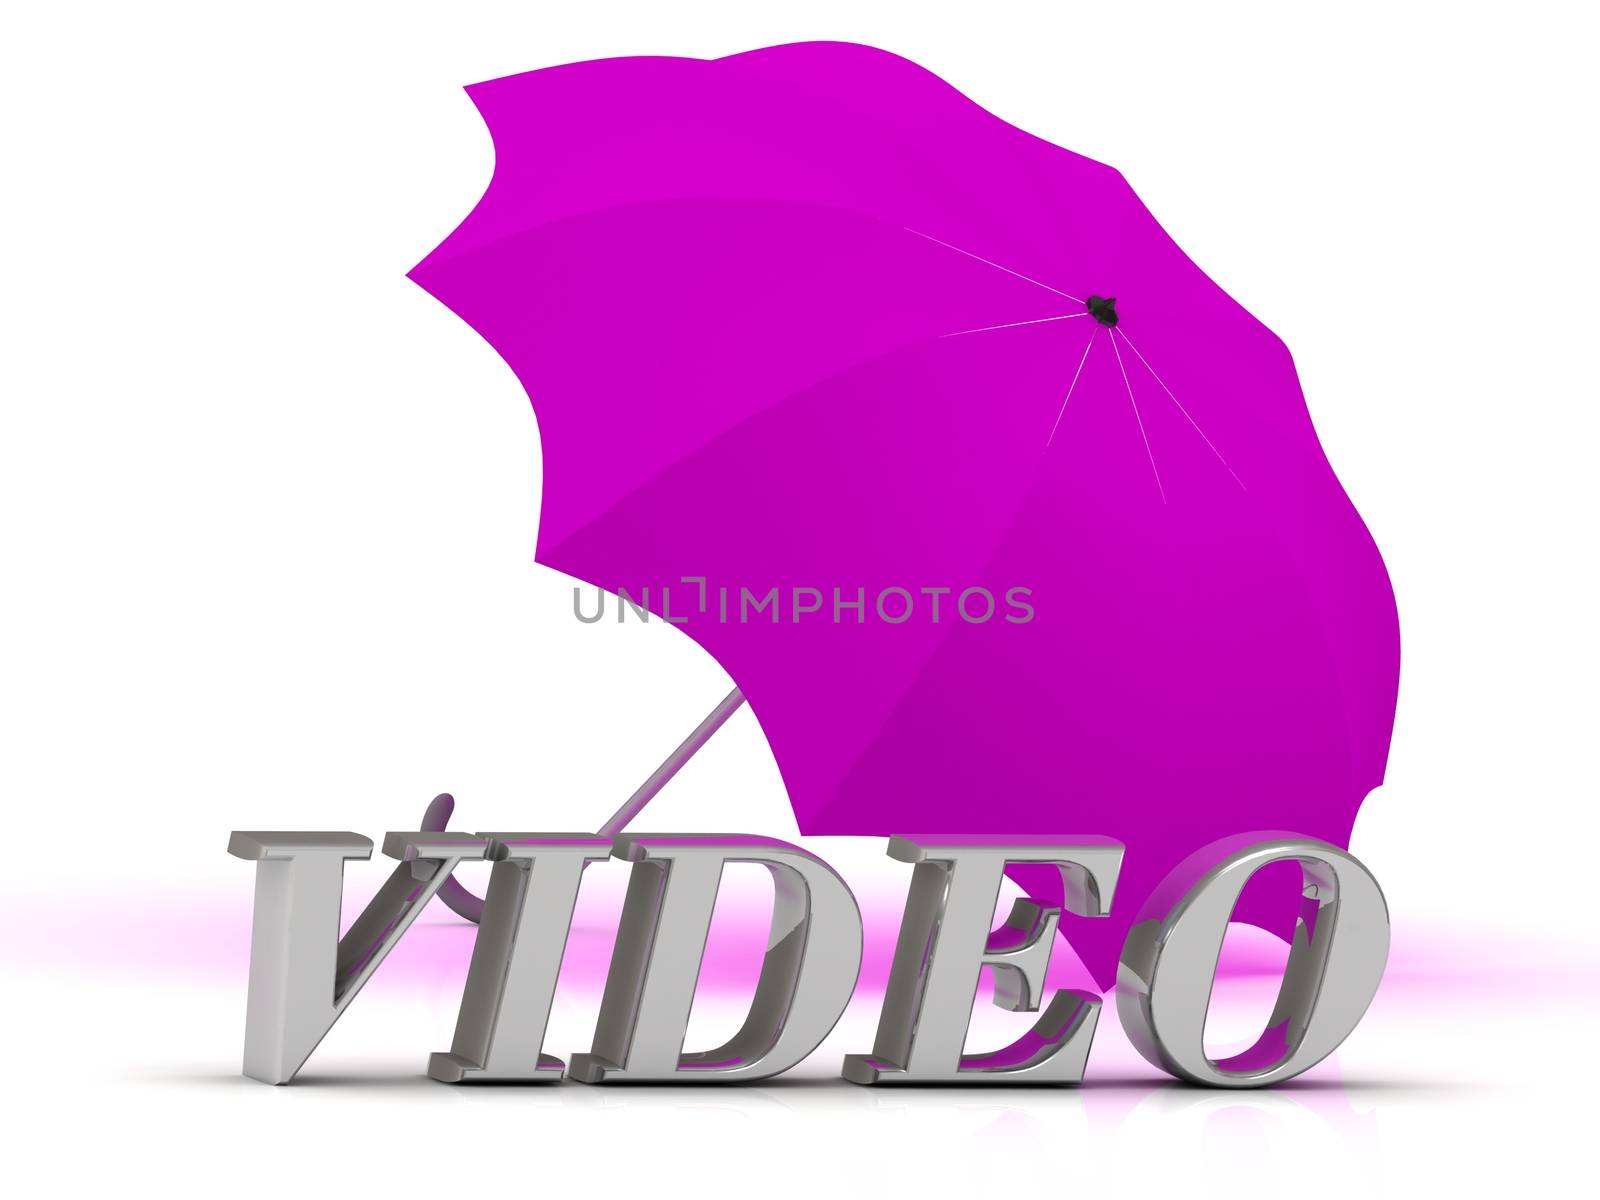 VIDEO- inscription of silver letters and umbrella on white background